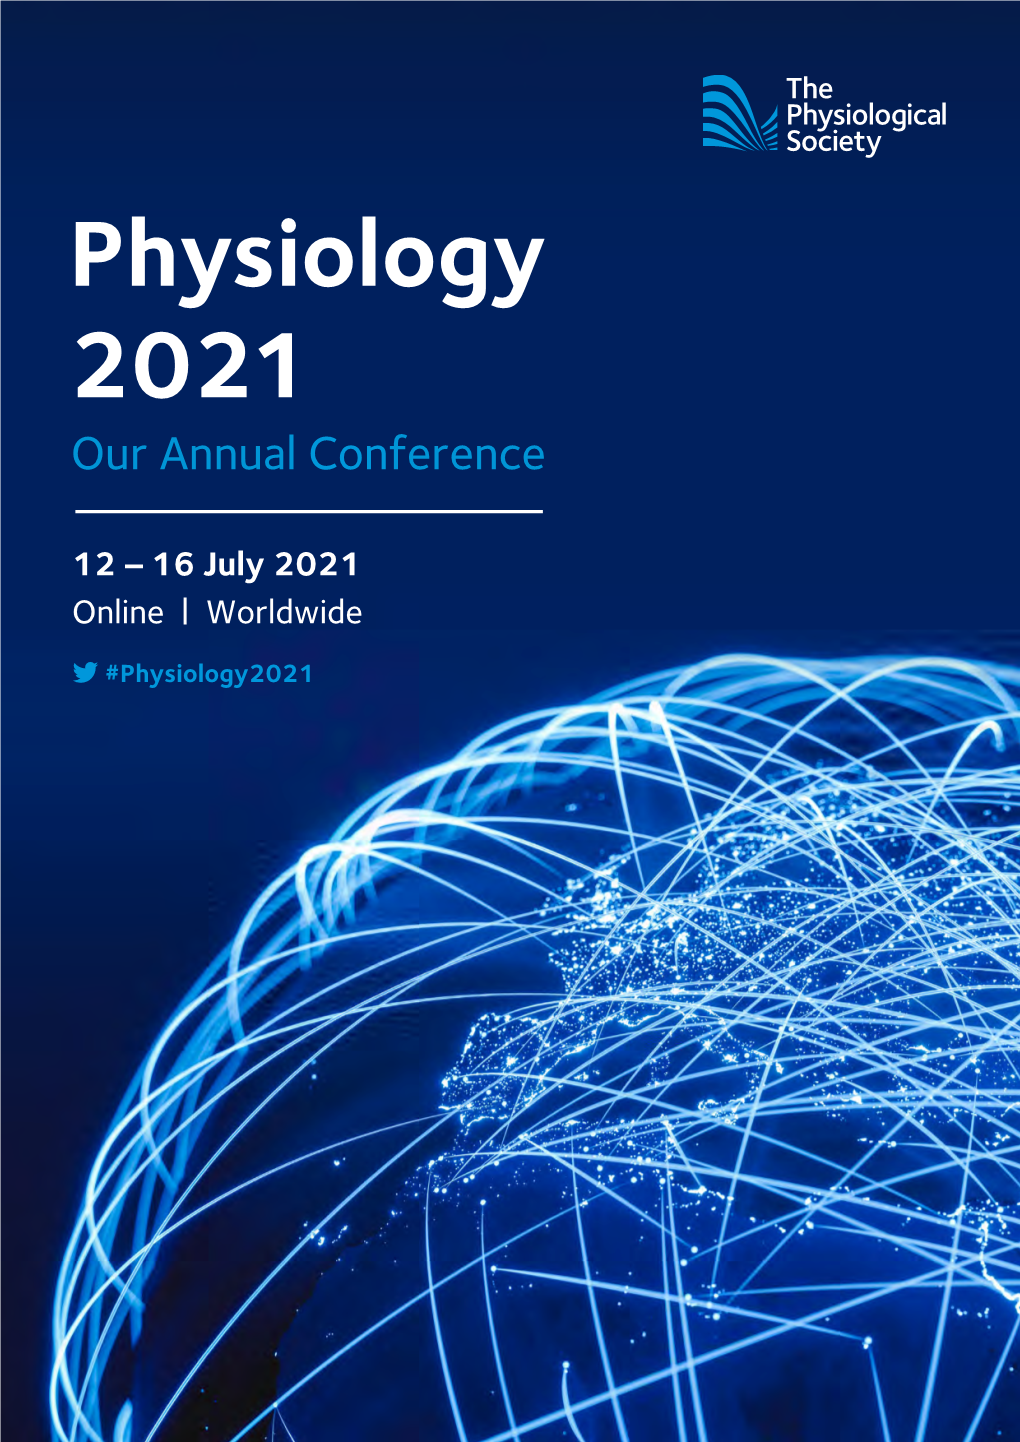 Physiology 2021 Our Annual Conference